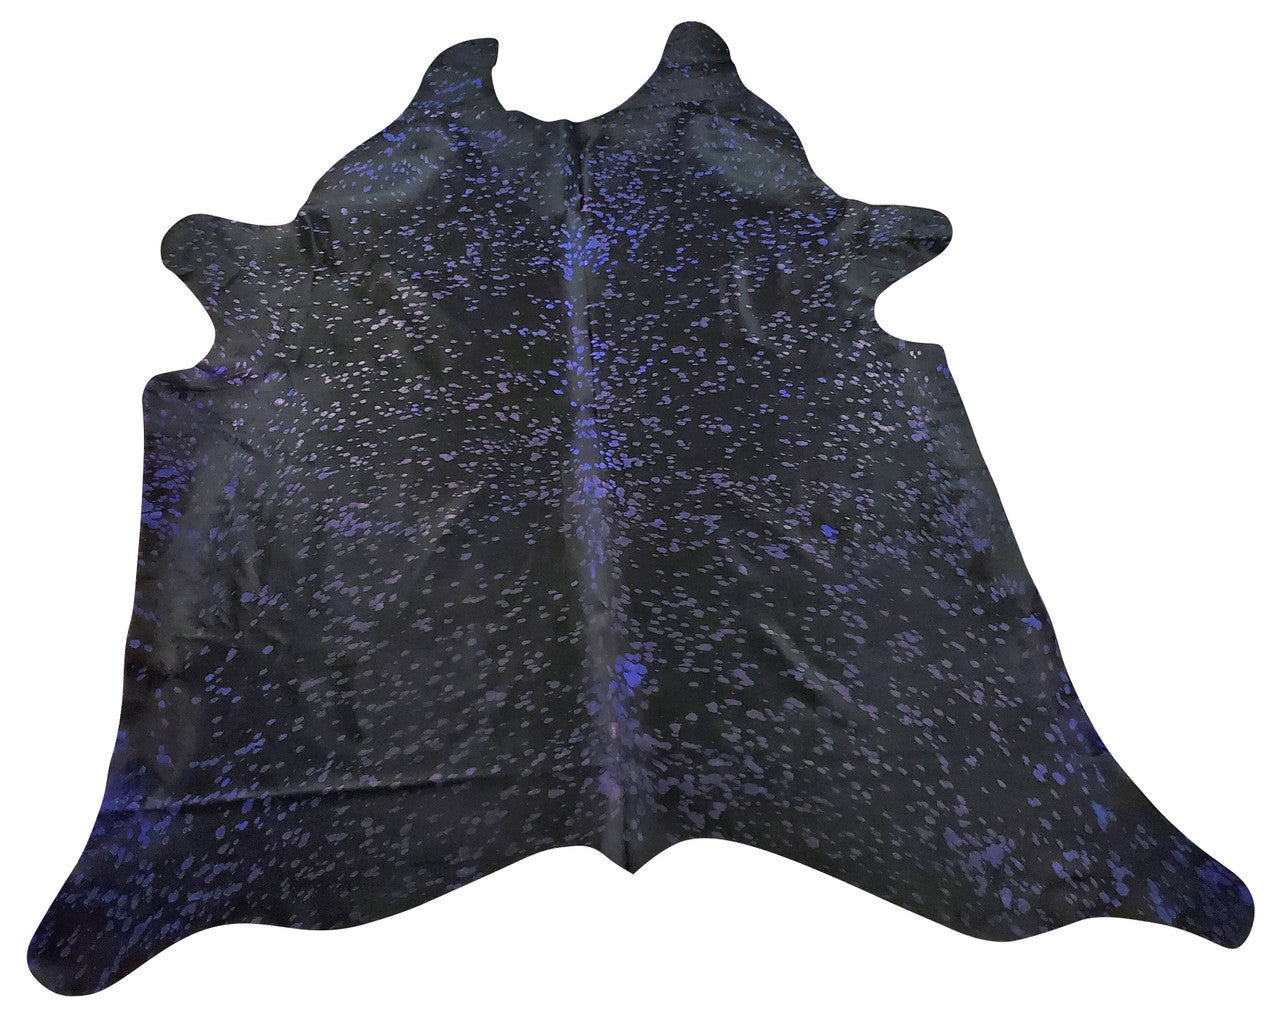 This dark metallic cowhide rug is beautiful and 100% natural, real and authentic, suitable for stunning and unique decoration, and it will complete any space.
